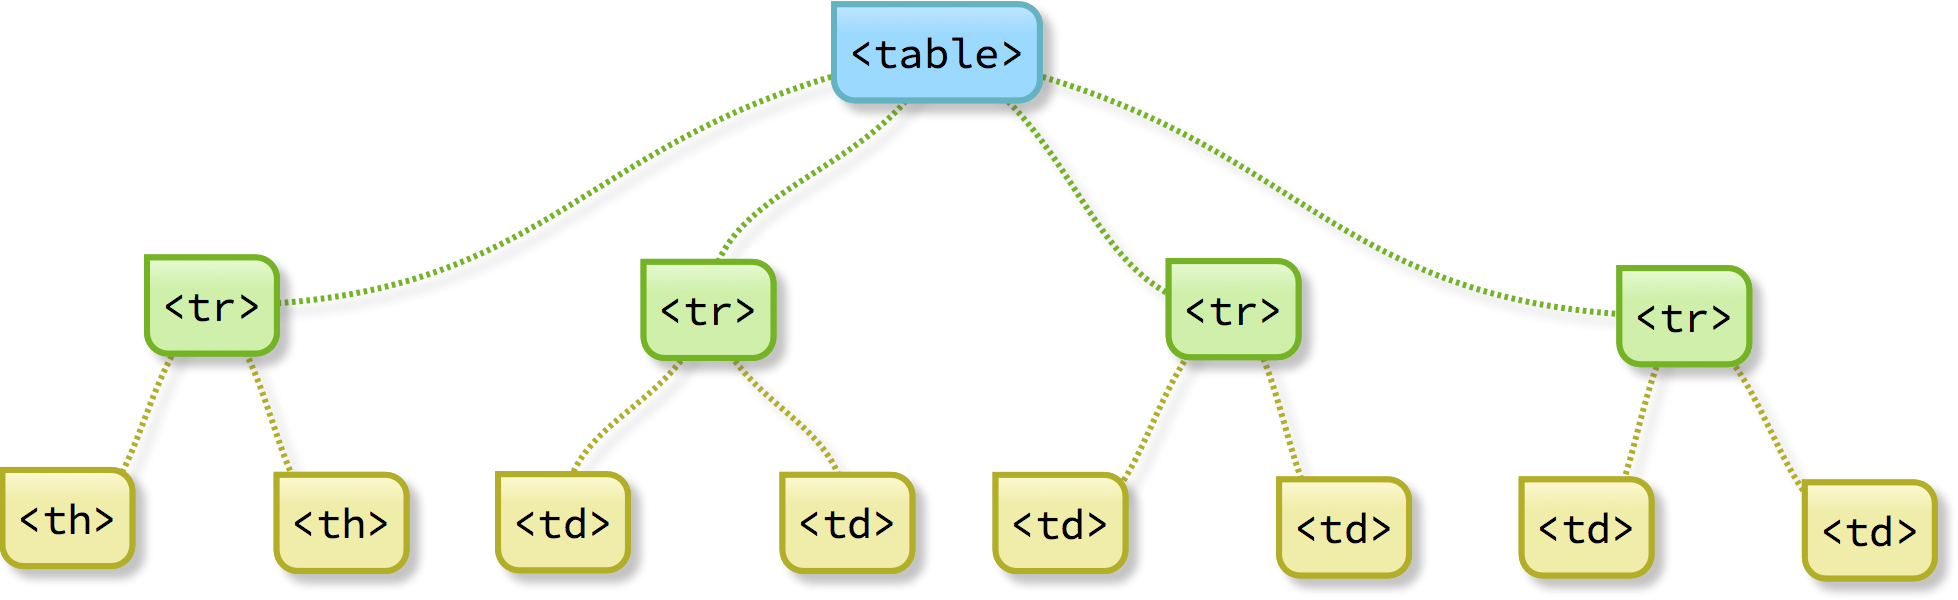 Table structure